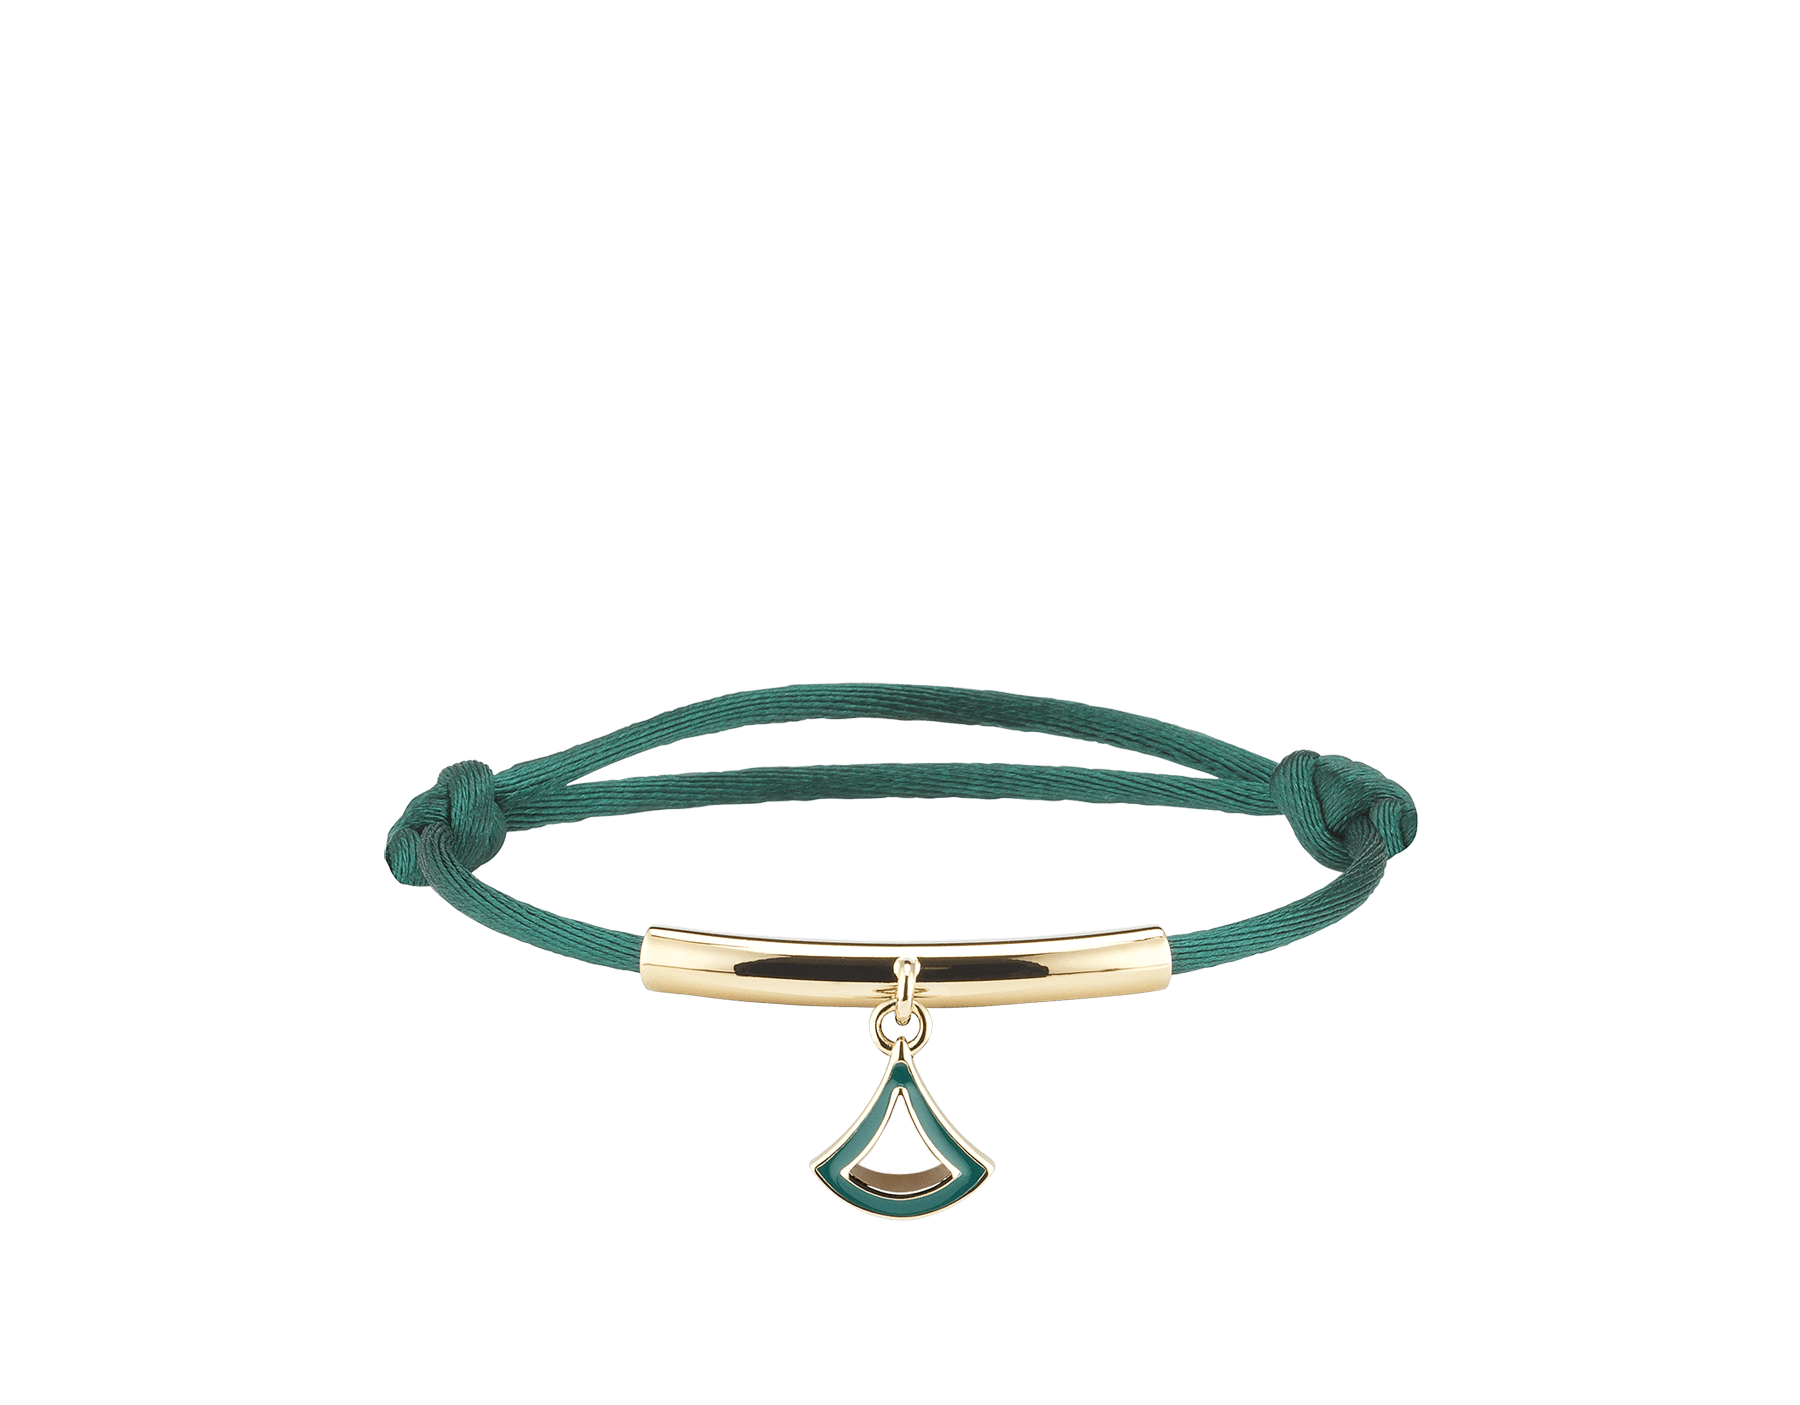 "Diva's Dream" bracelet in emerald green fabric with a light gold-plated brass plate. Distinctive Diva charm in light gold-plated brass enamelled in emerald green. DIVAMINISTRINGa image 1